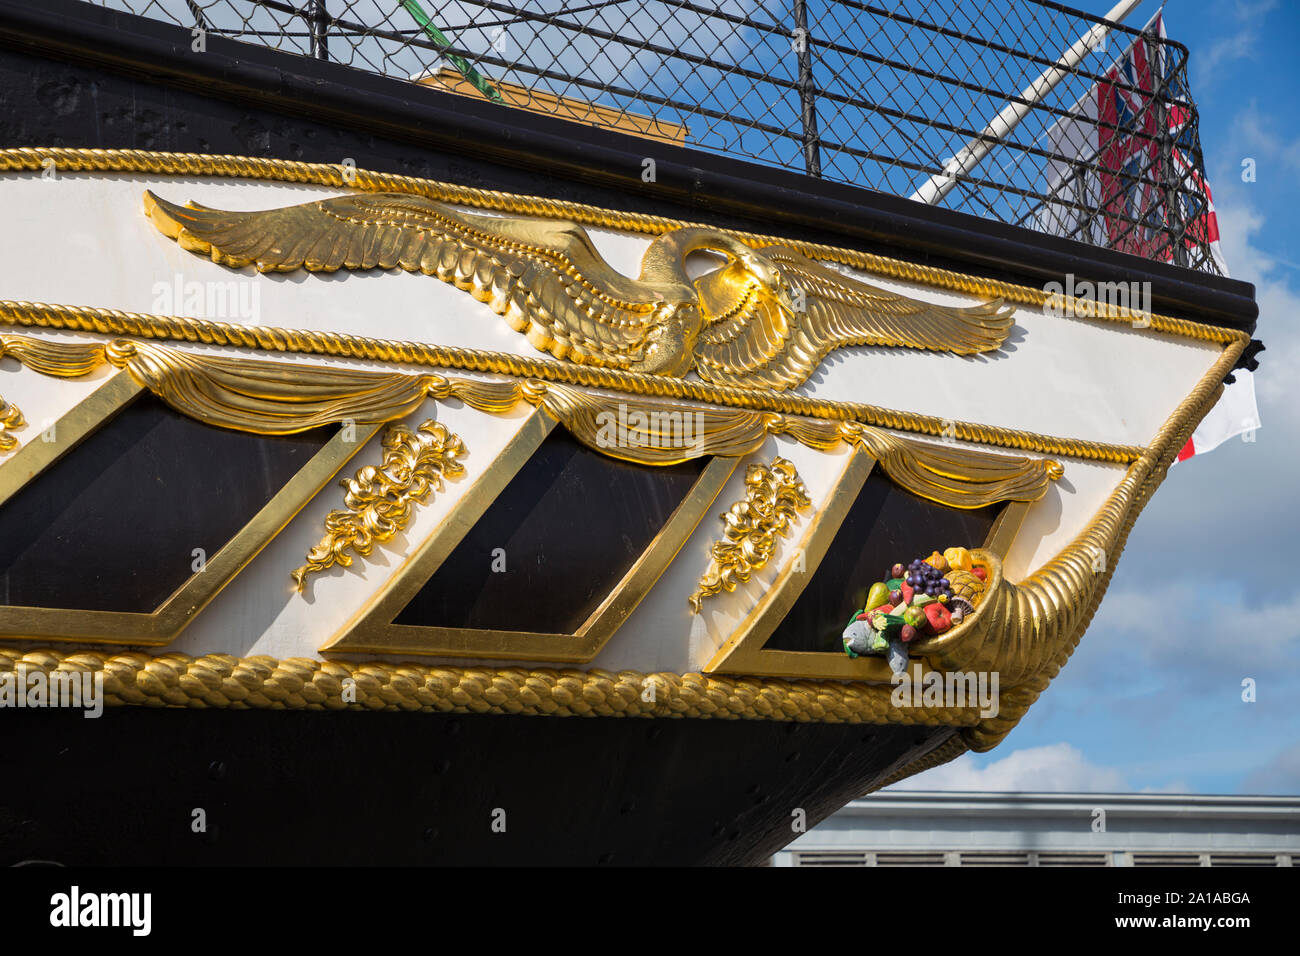 Ornamental carving and decoration with a gilded gold swan and cornucopia, around the windows at the stern / rear / back of the SS Great Britain, isambard Kingdom Brunel's iron ship. UK Dockyard Museum, Bristol. UK (109) Stock Photo